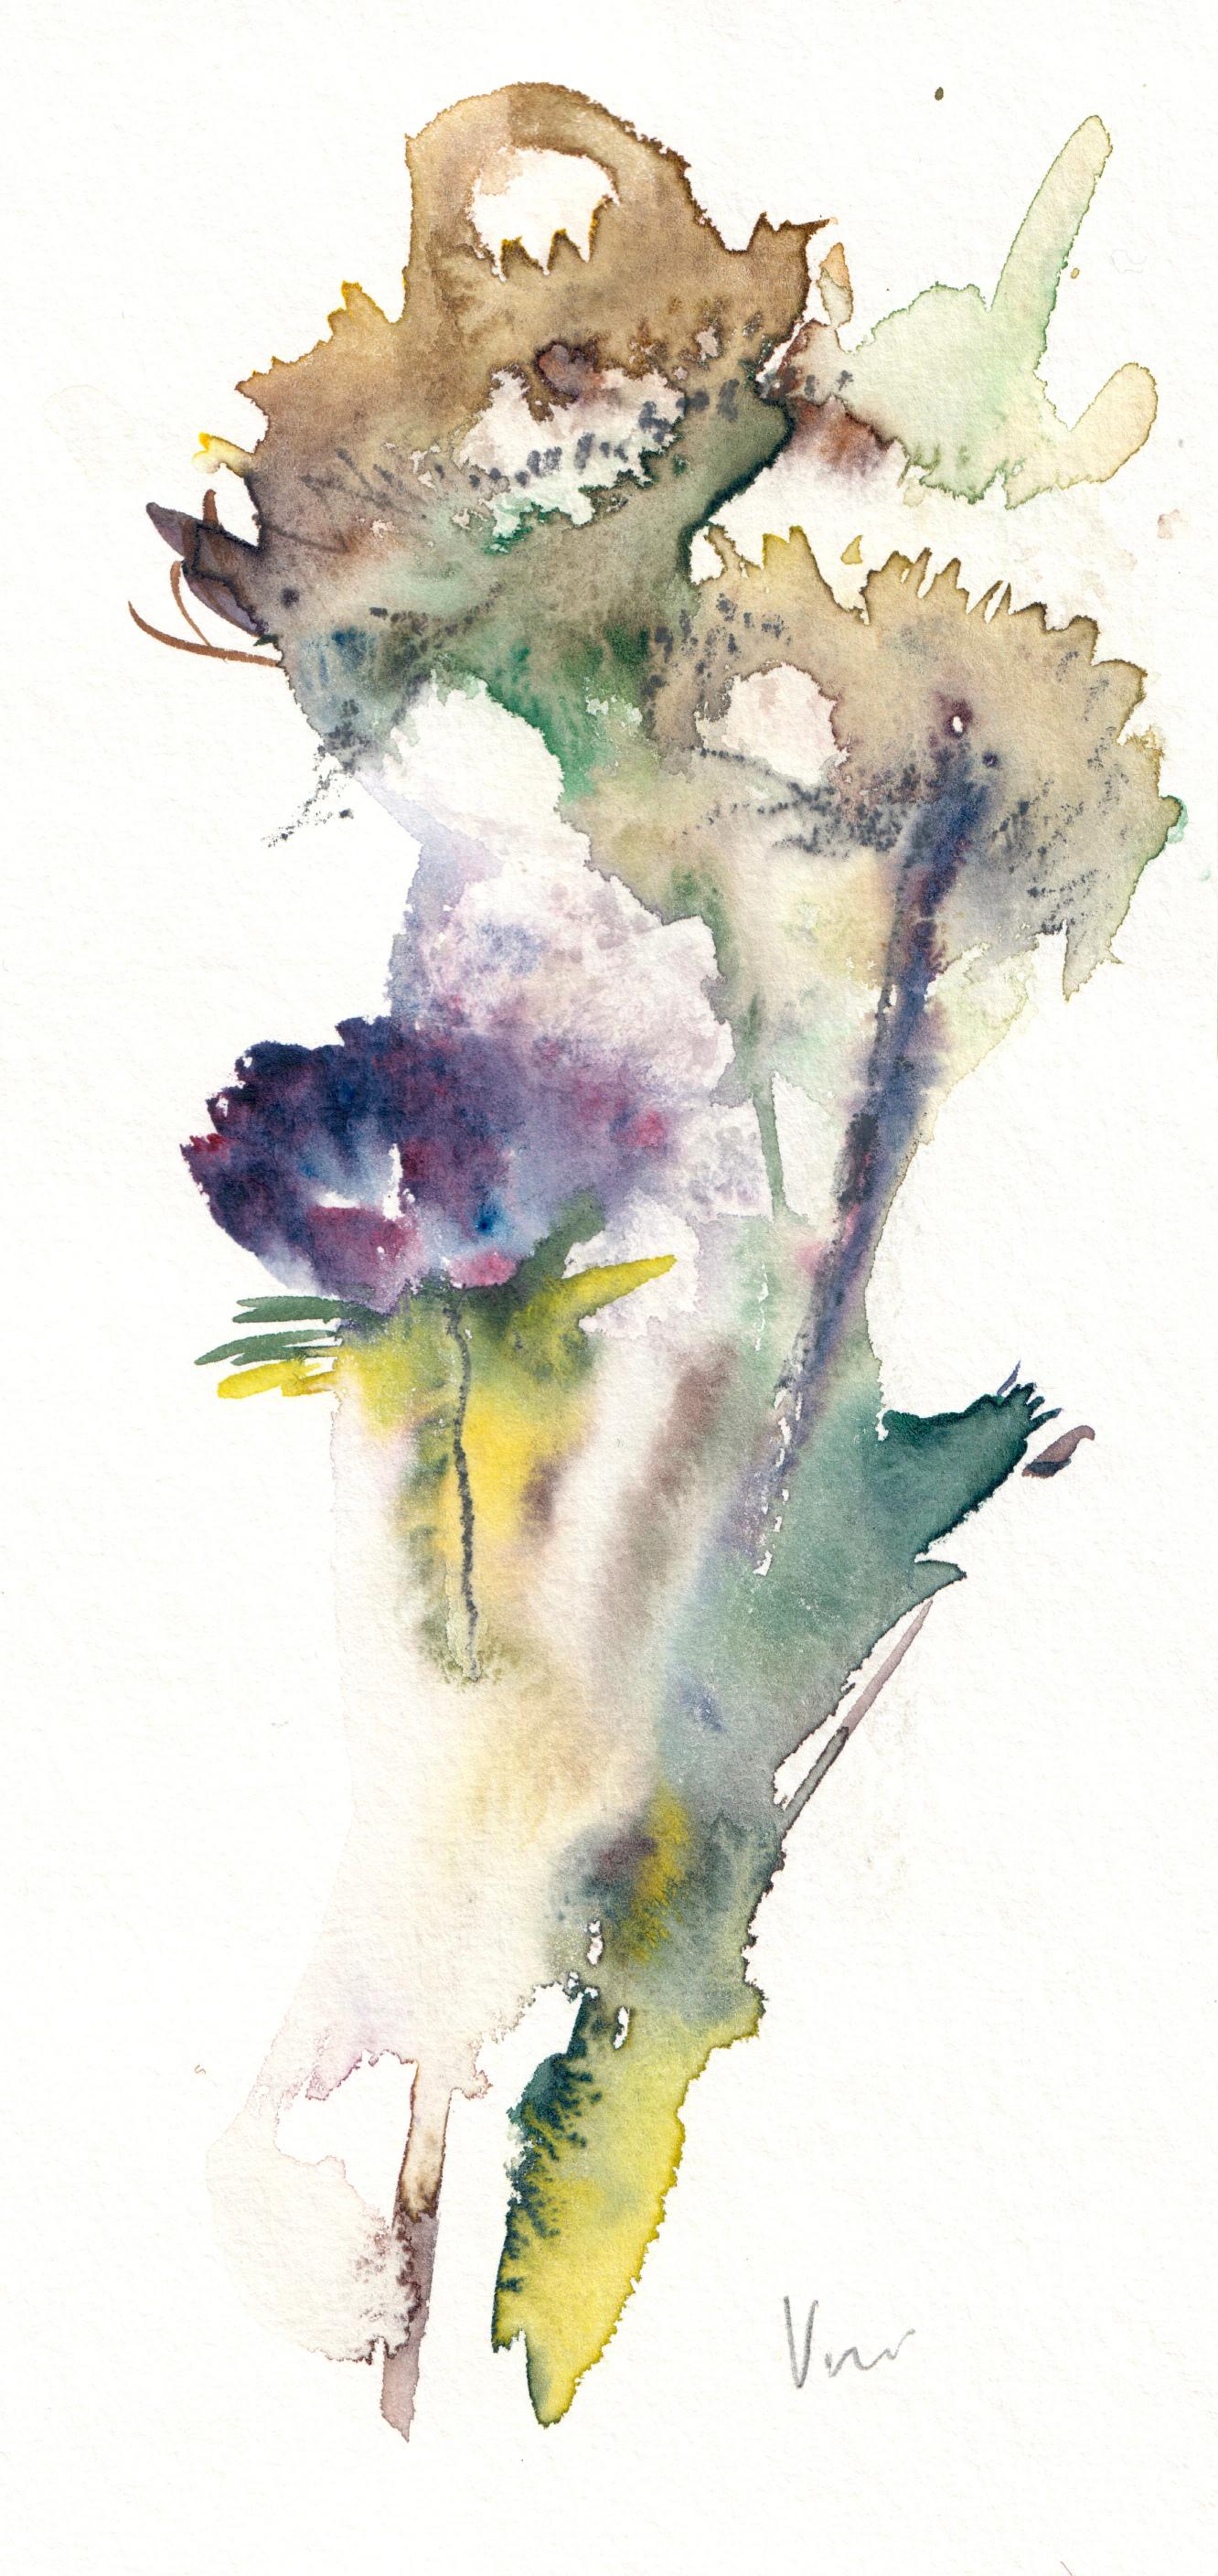 Watercolor on Hahnemuhle paper - artwork unframed for $300